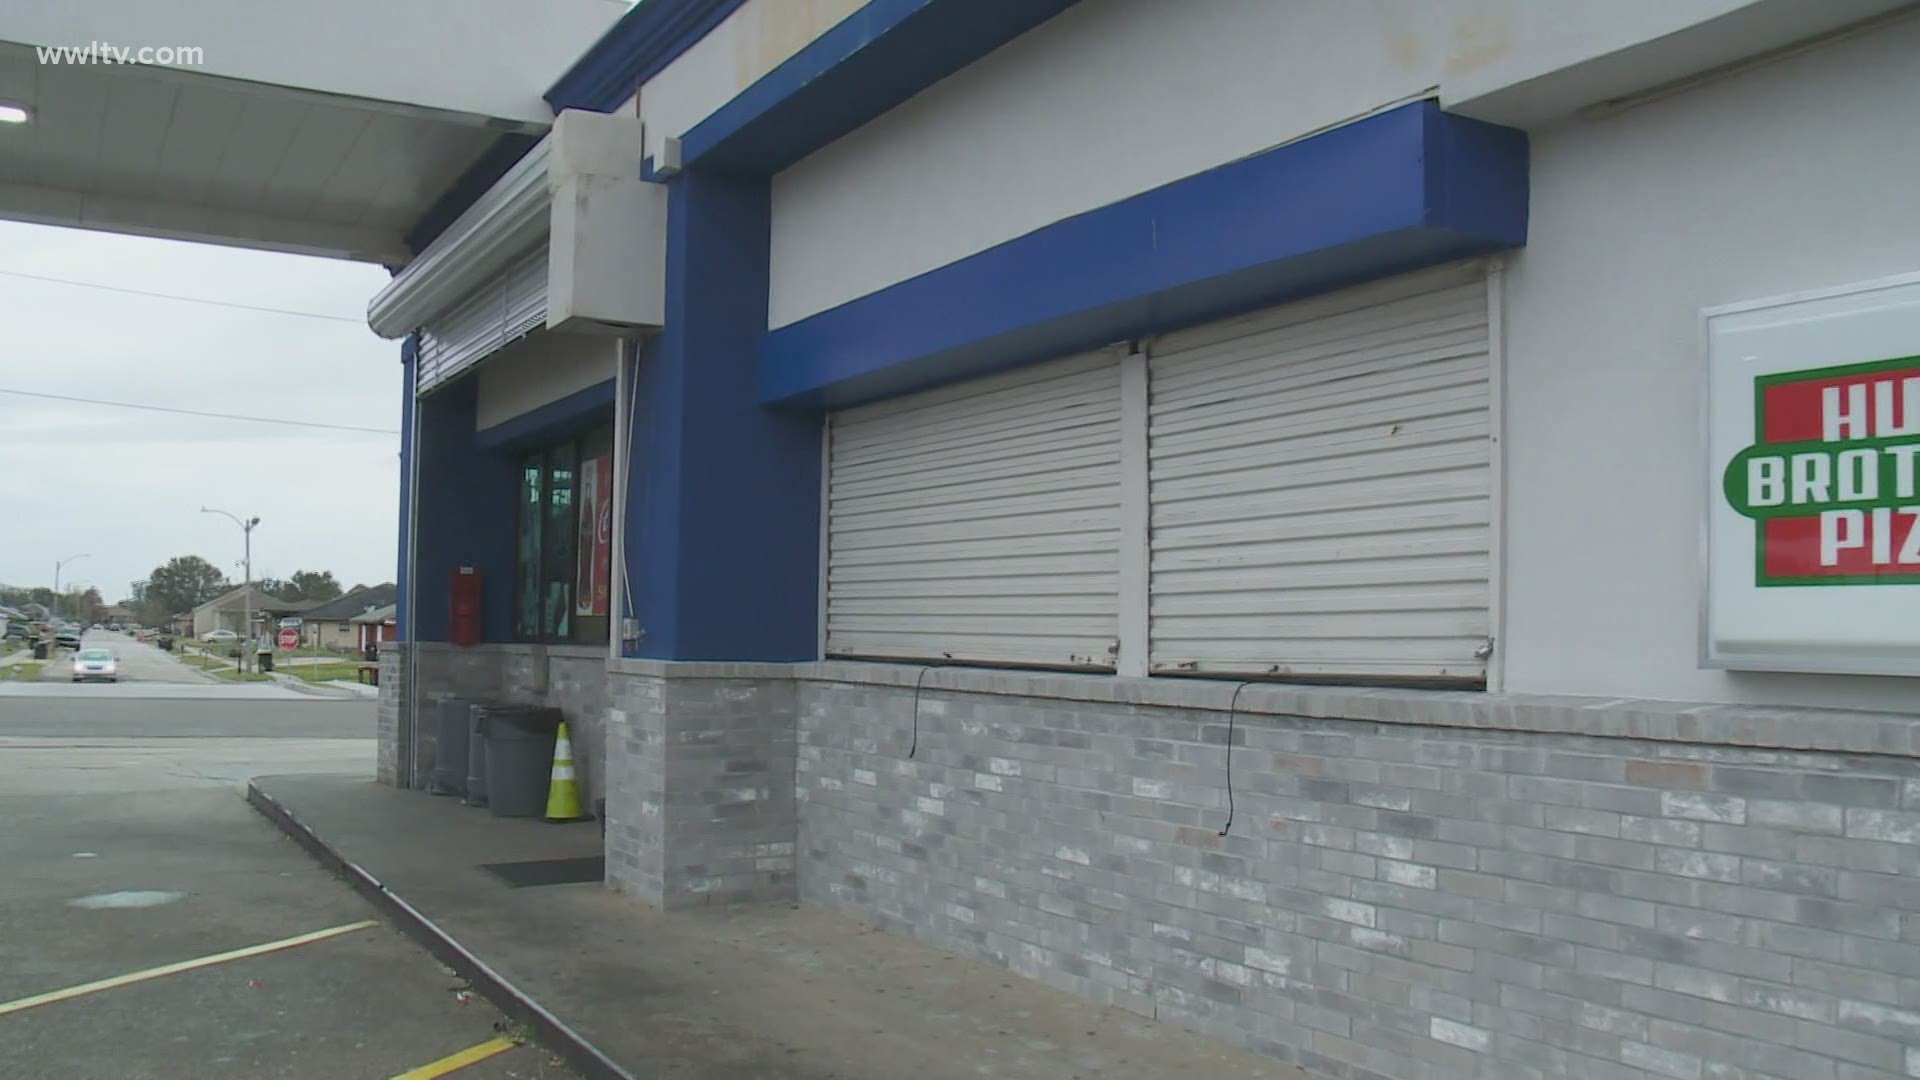 Convenience store worker kills armed robber who began shooting in store